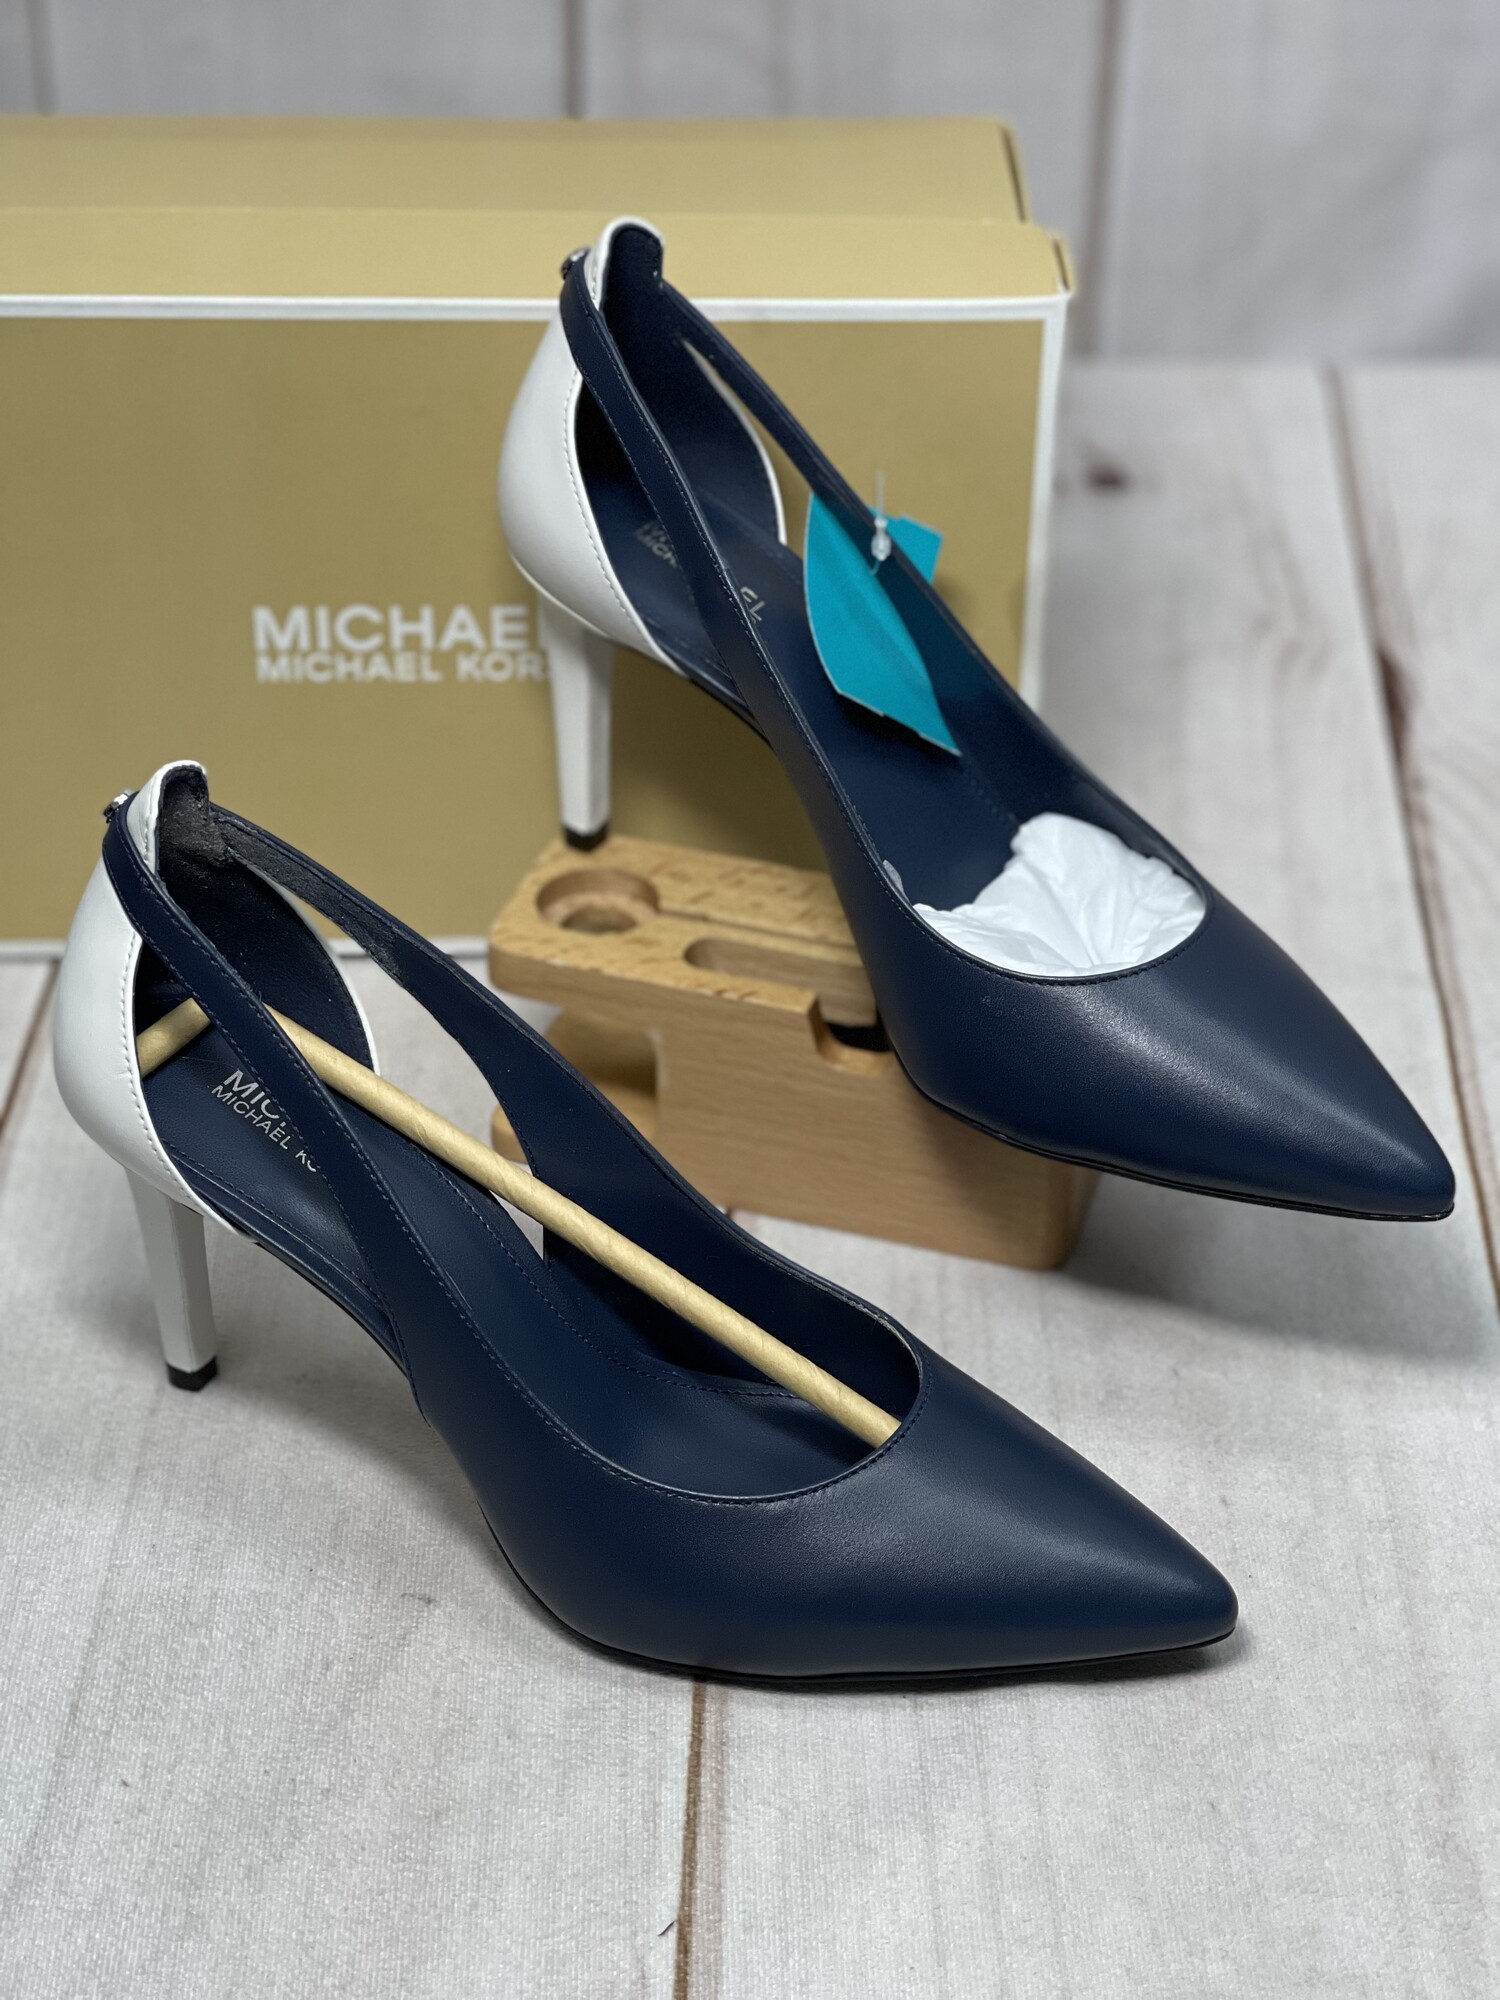 Michael Kors Pumps / Heels - New in Box
Navy with White Detailing
Size: Womens 8
Genuine Leather
Cersei Flex Mid